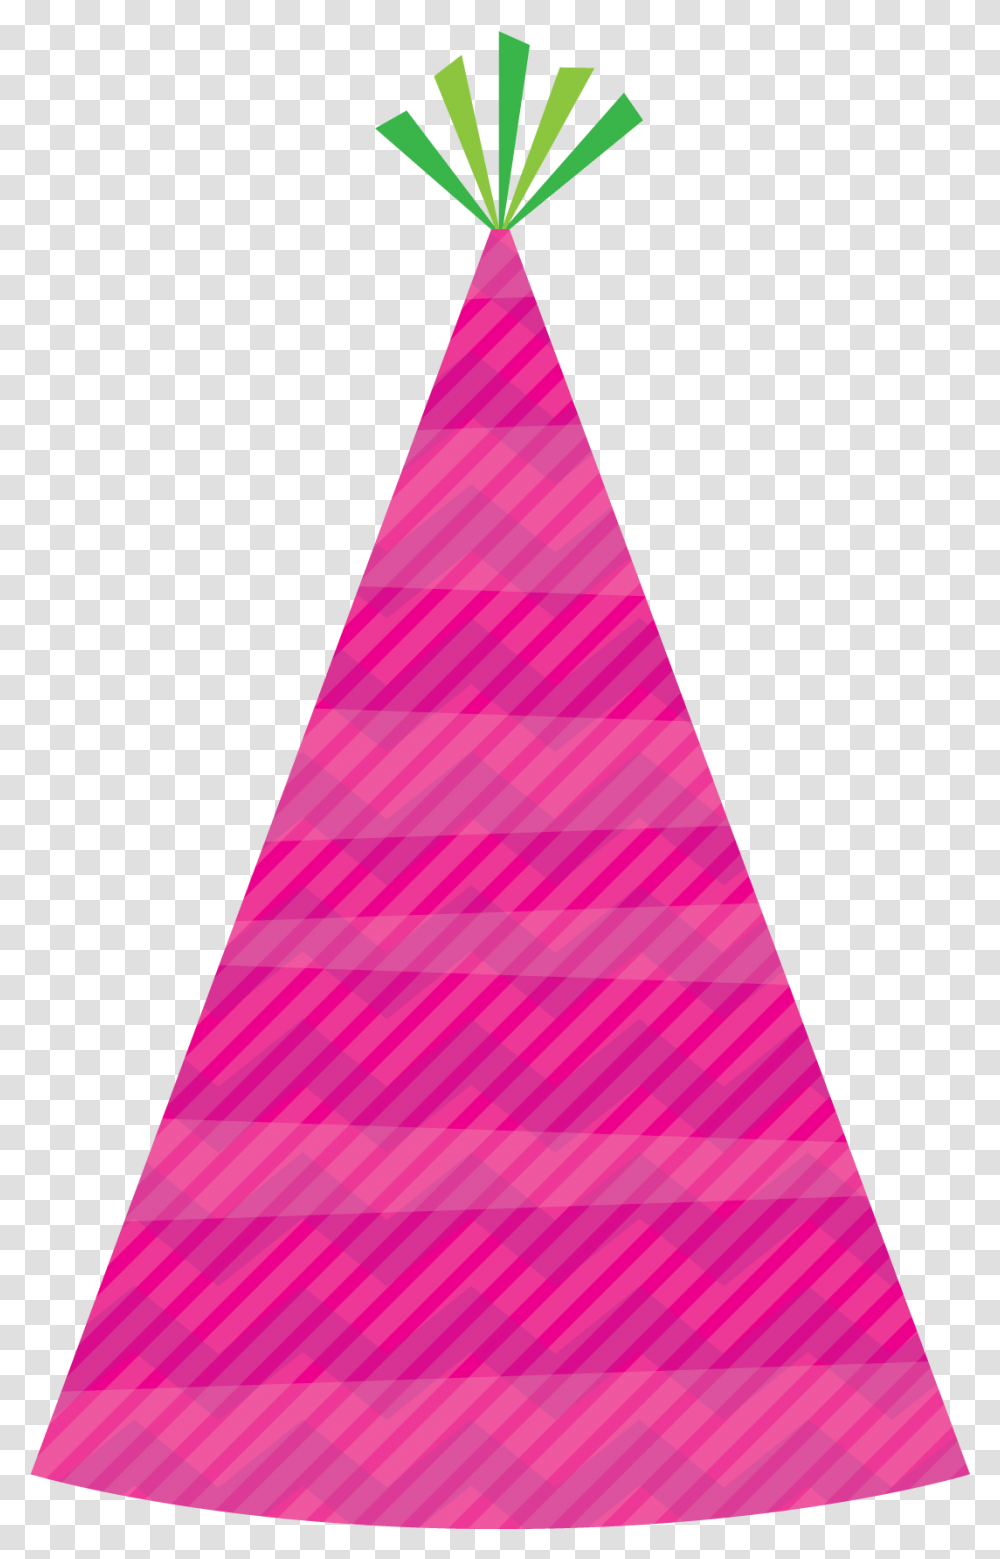 Birthday Hat Free Party Hats Cartoon, Triangle, Cone Transparent Png